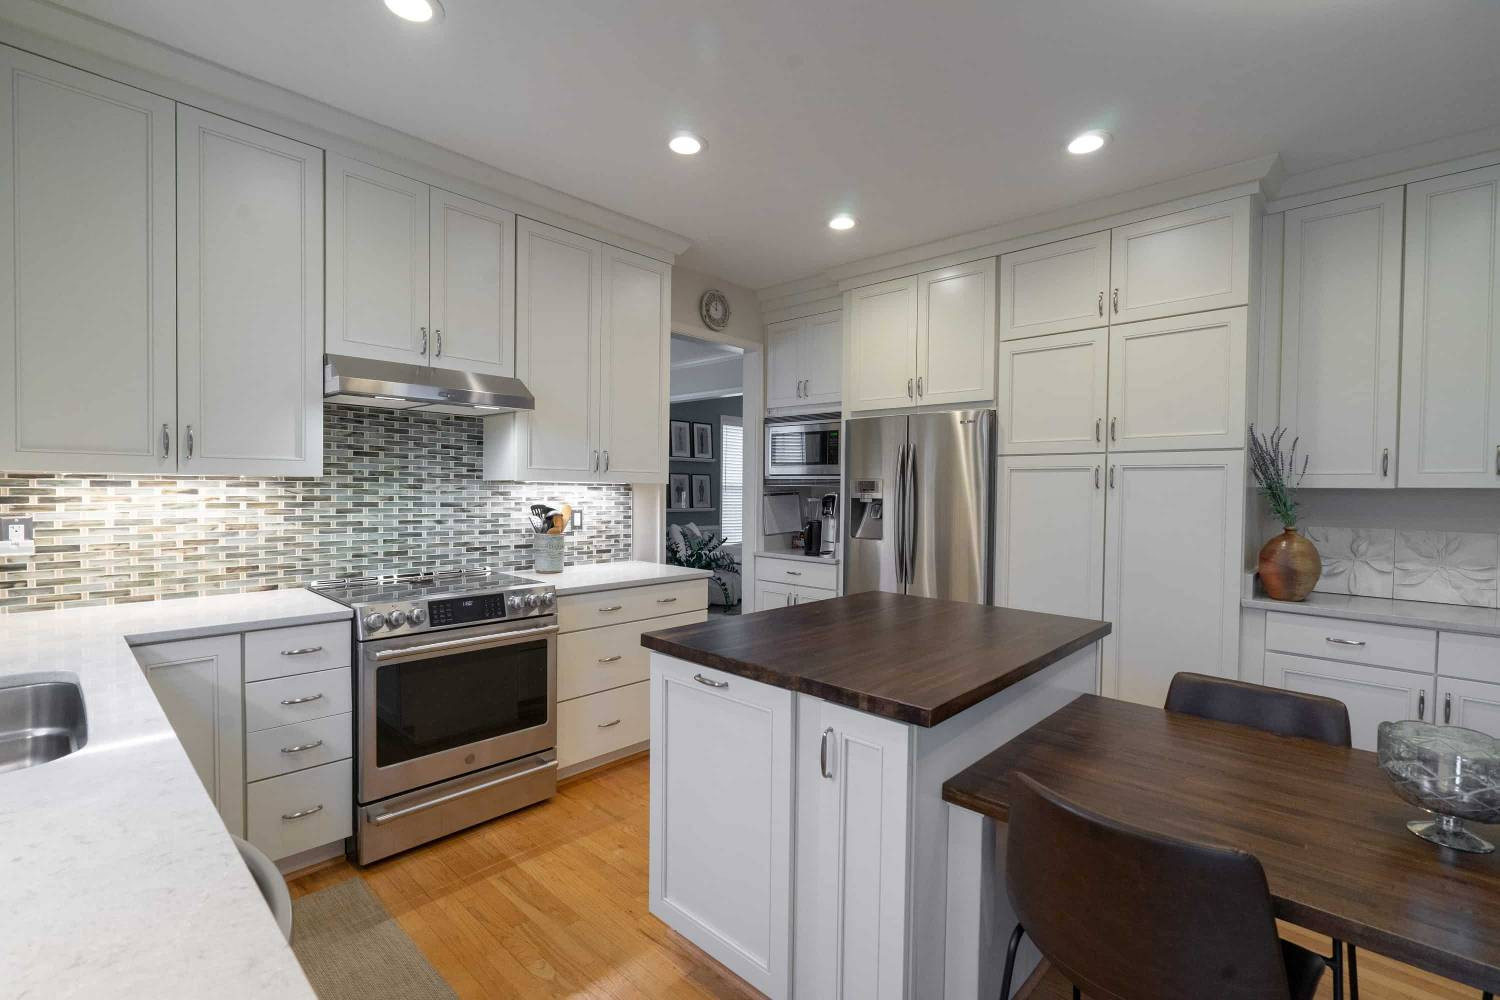 Kitchen And Bath Remodel
 Best Kitchen and Bathroom Remodeling in Fairfax and Bethesda